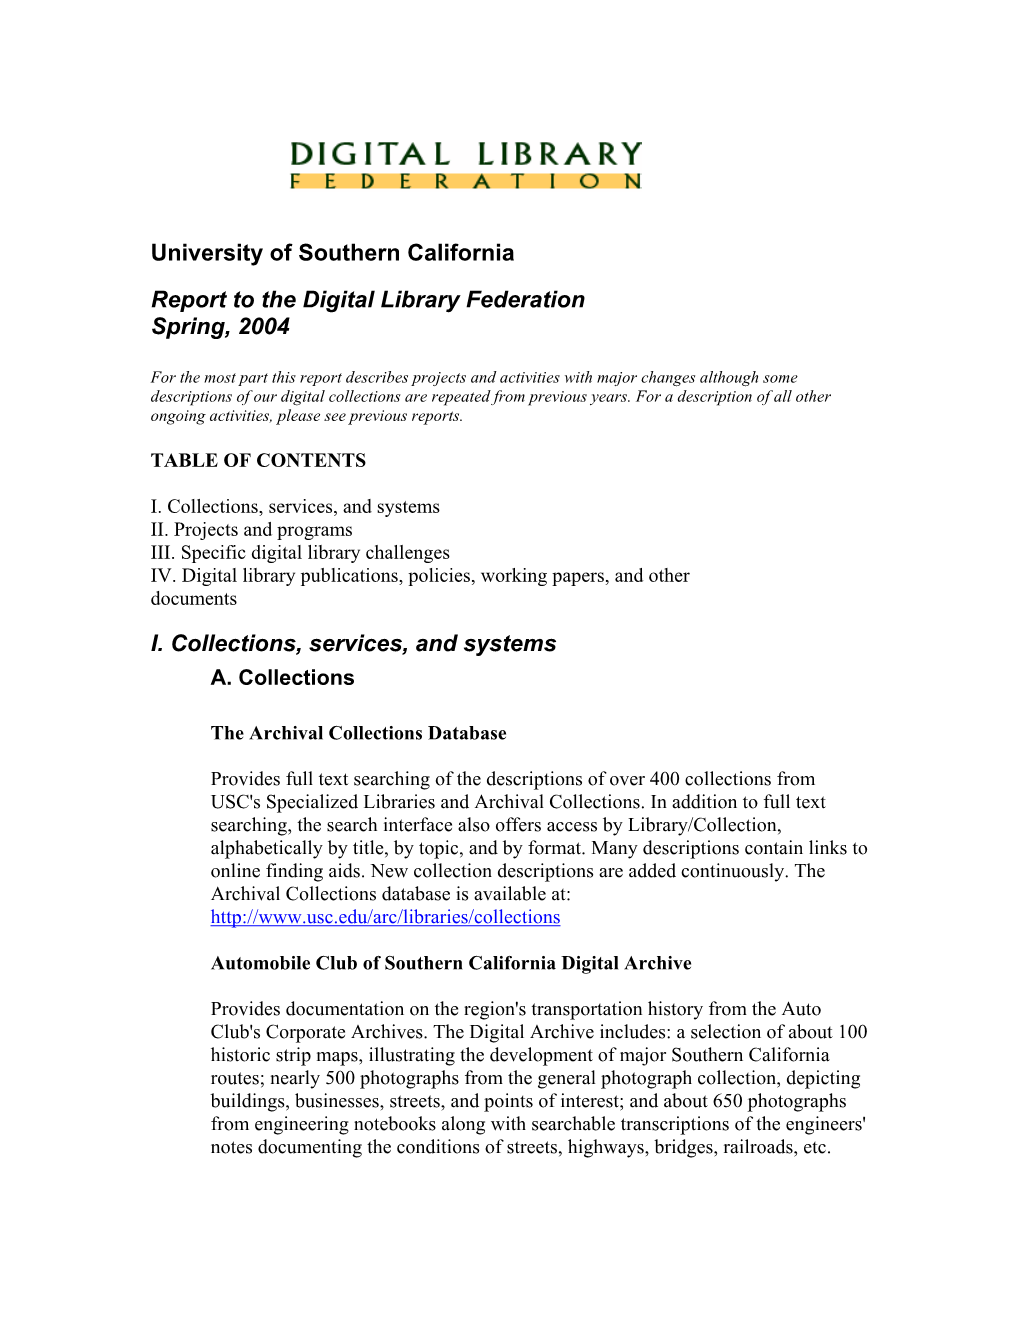 University of Southern California Report to the Digital Library Federation Spring, 2004 I. Collections, Services, and Systems